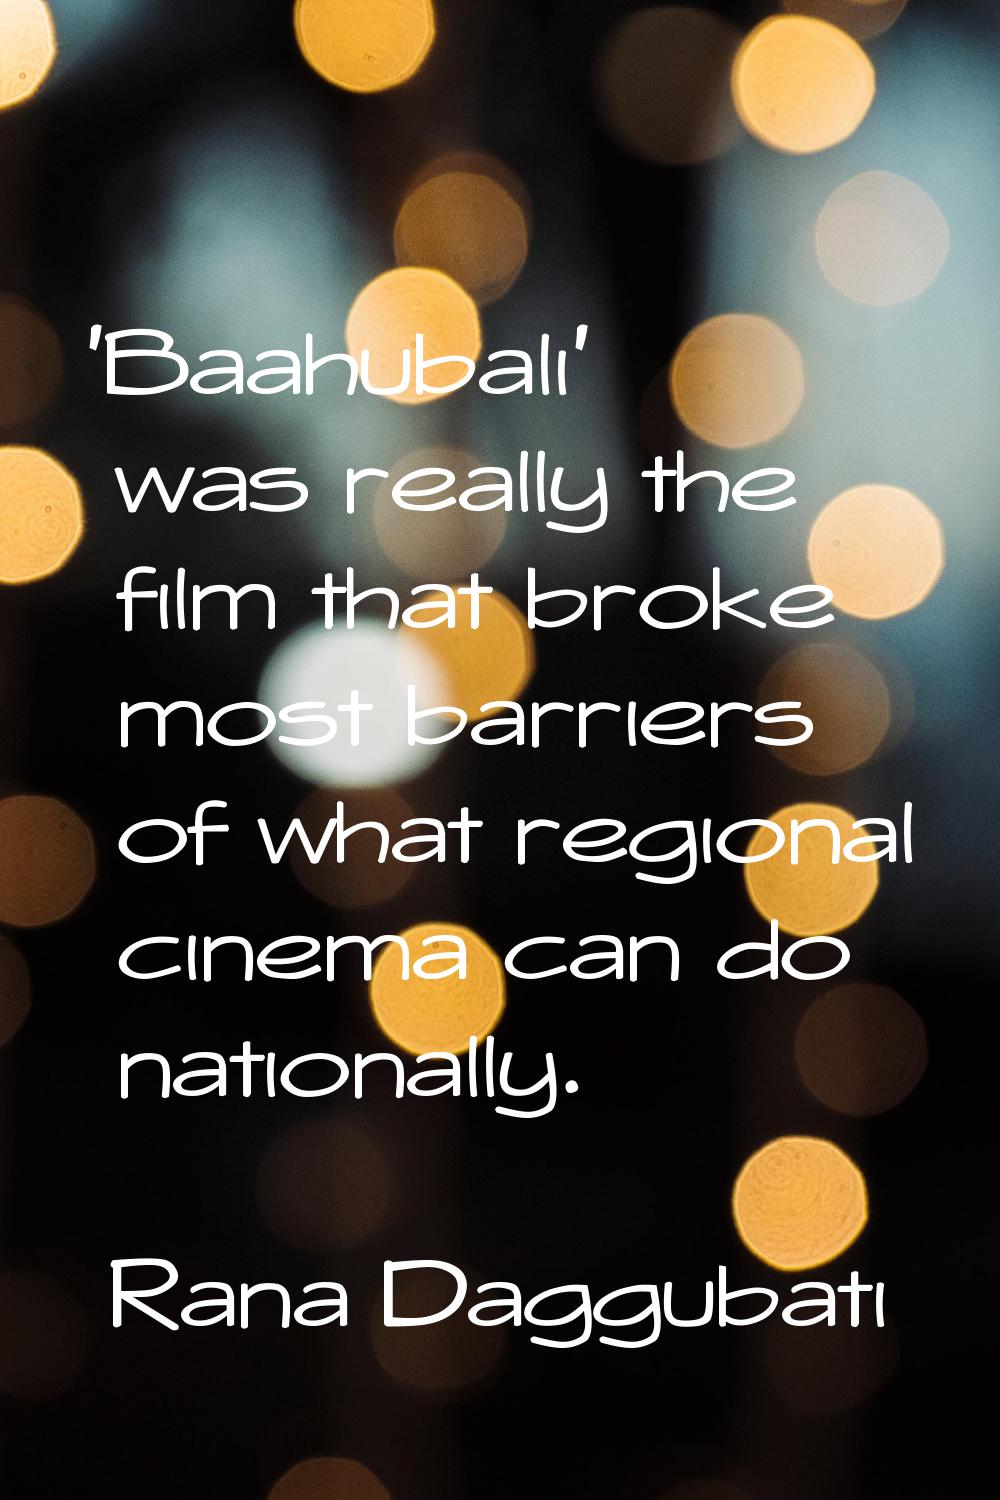 'Baahubali' was really the film that broke most barriers of what regional cinema can do nationally.